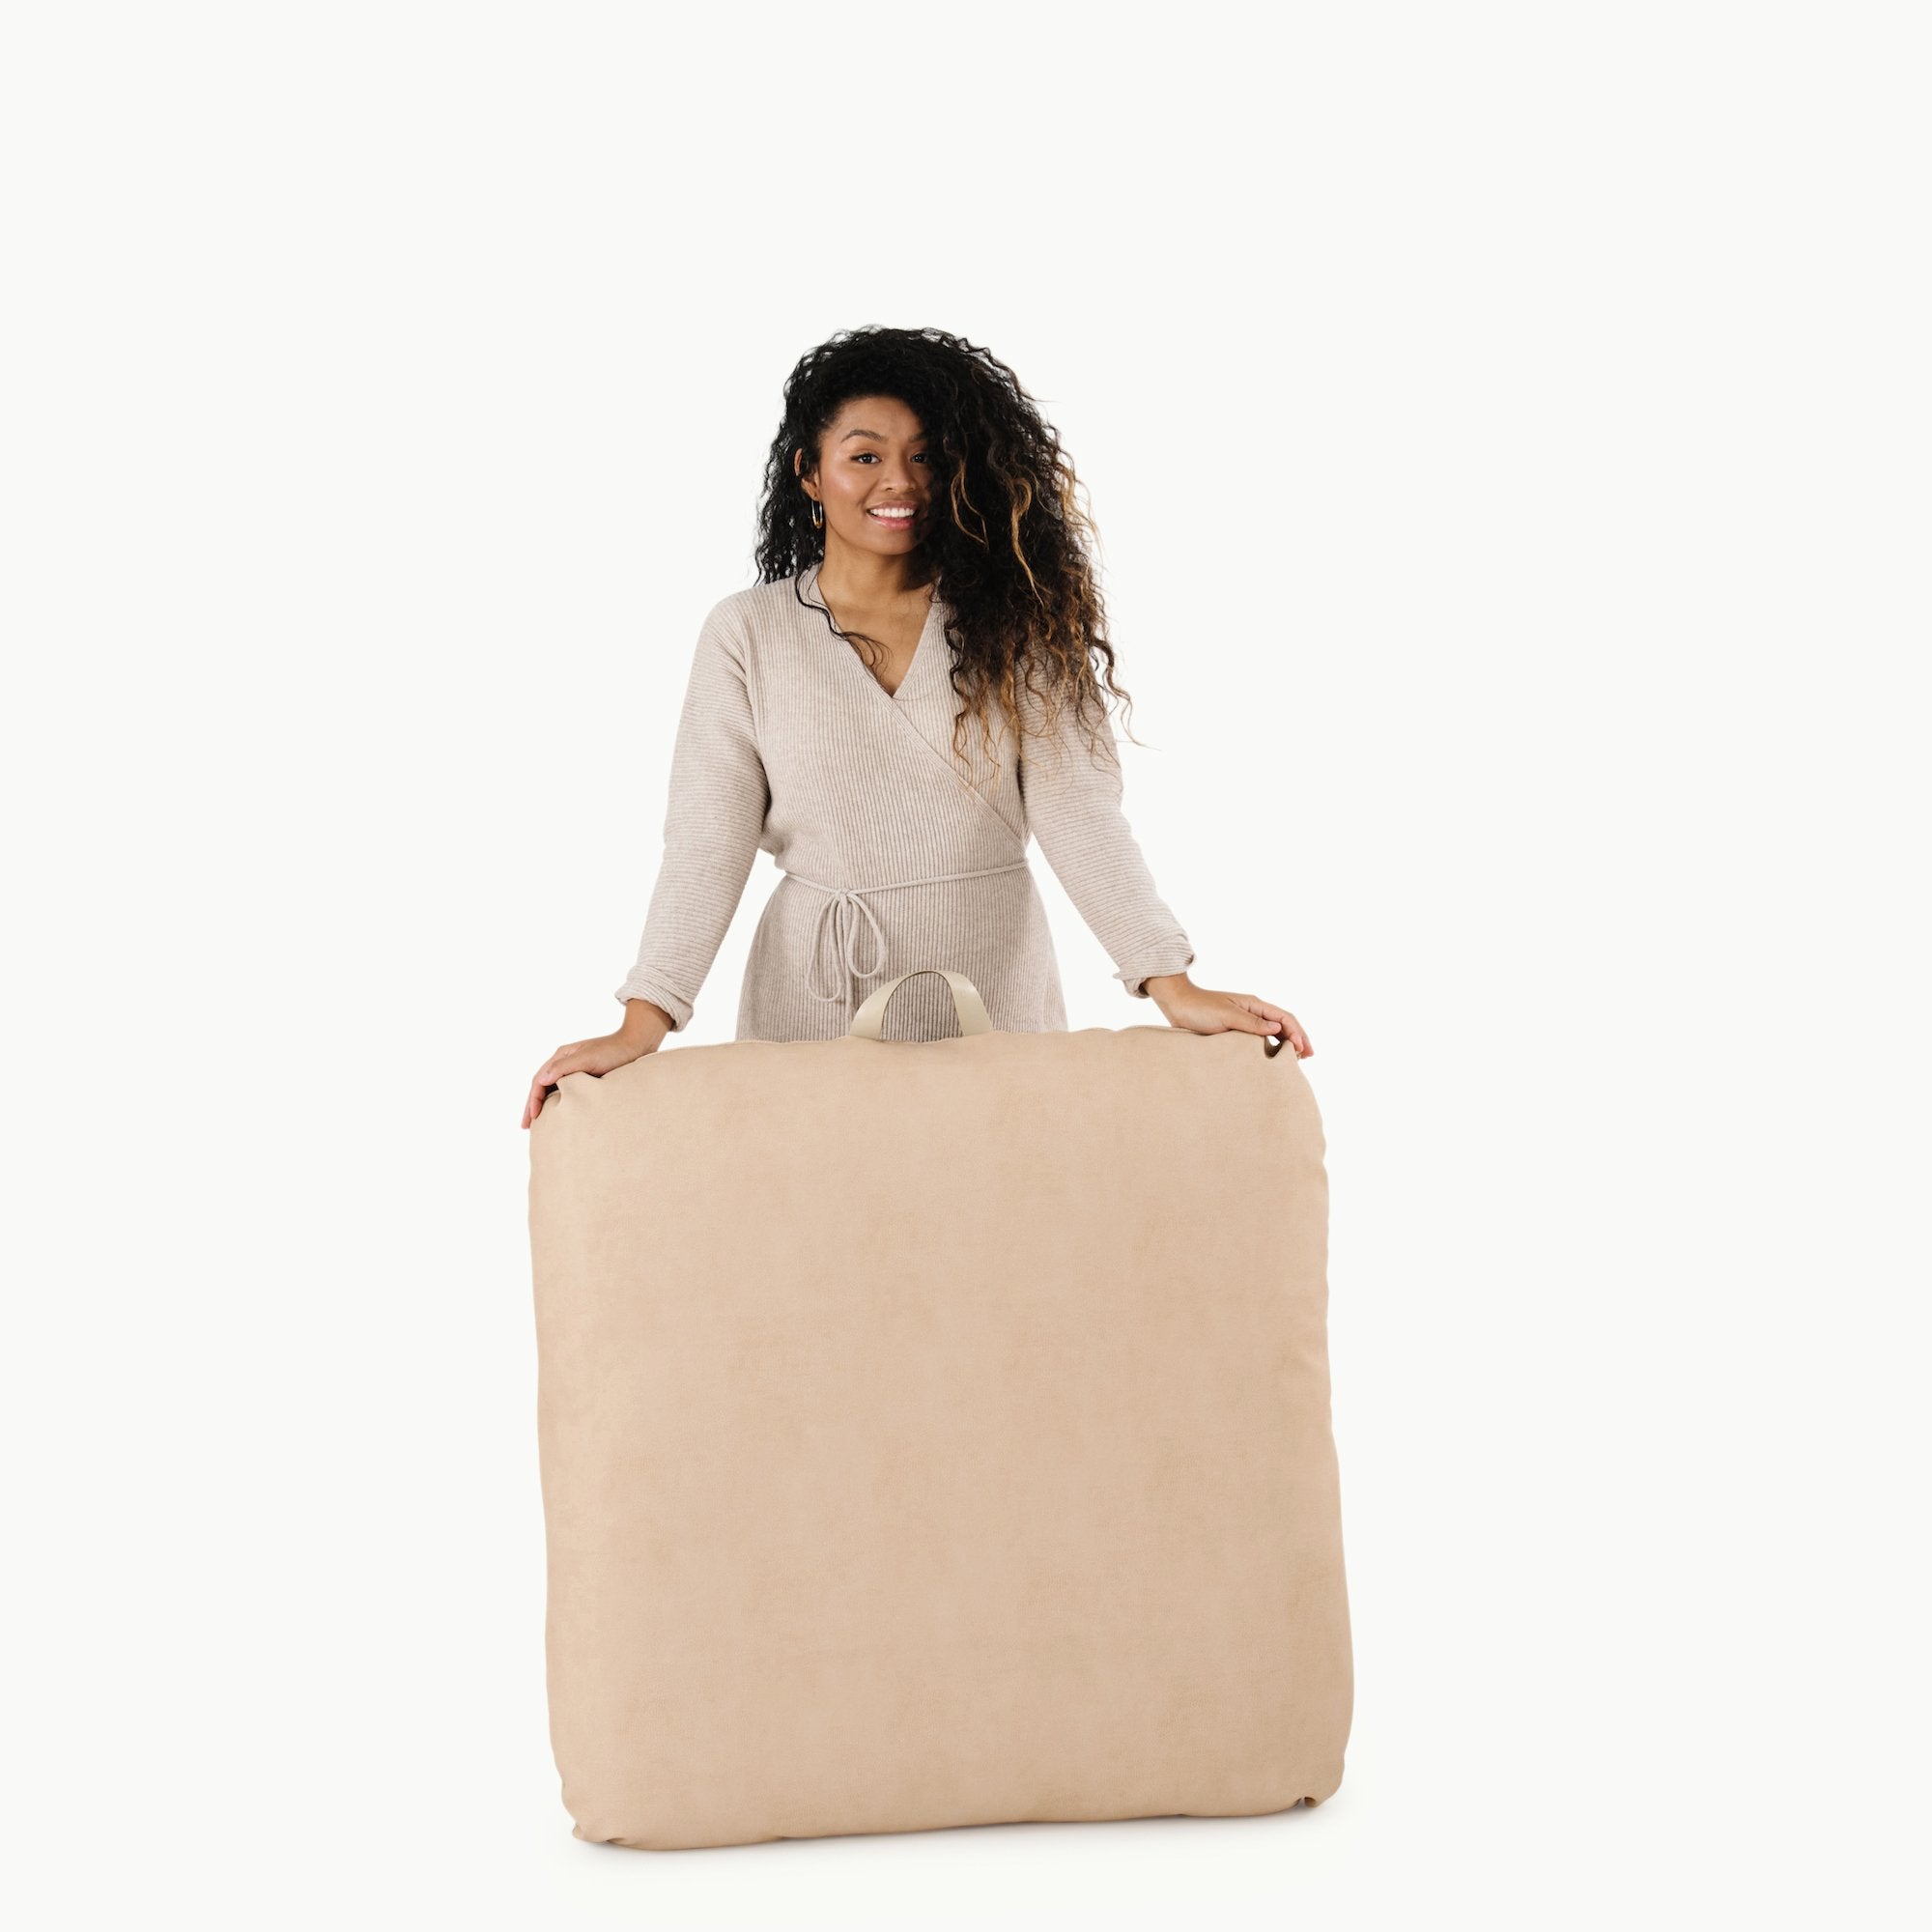 Untanned  (on sale) / Square@Woman holding the Untanned Square Floor Cushion